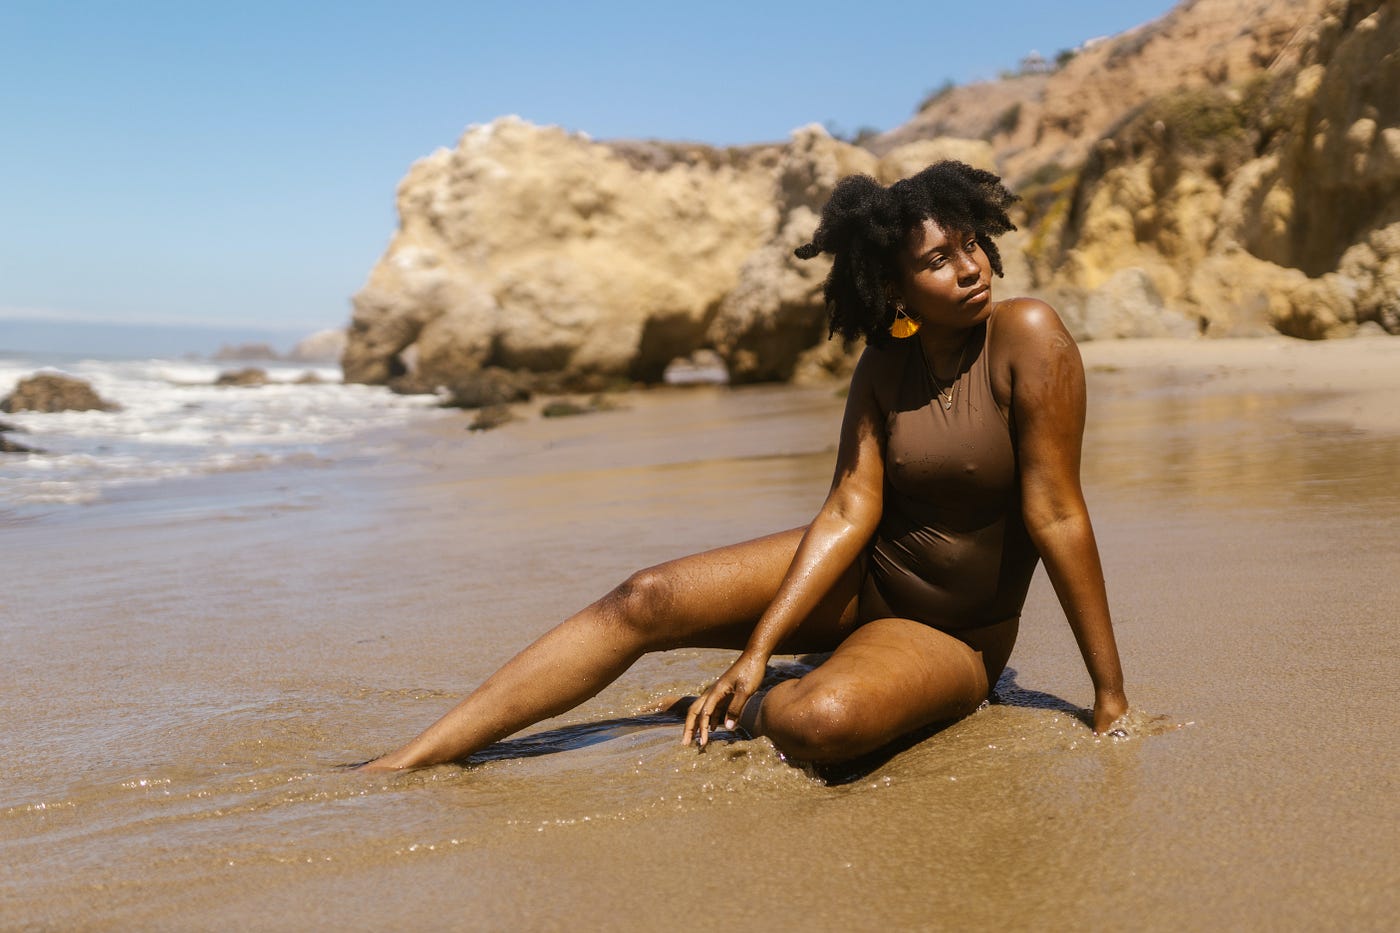 A Black woman lies on a sandy beach with a brown swimsuit on.